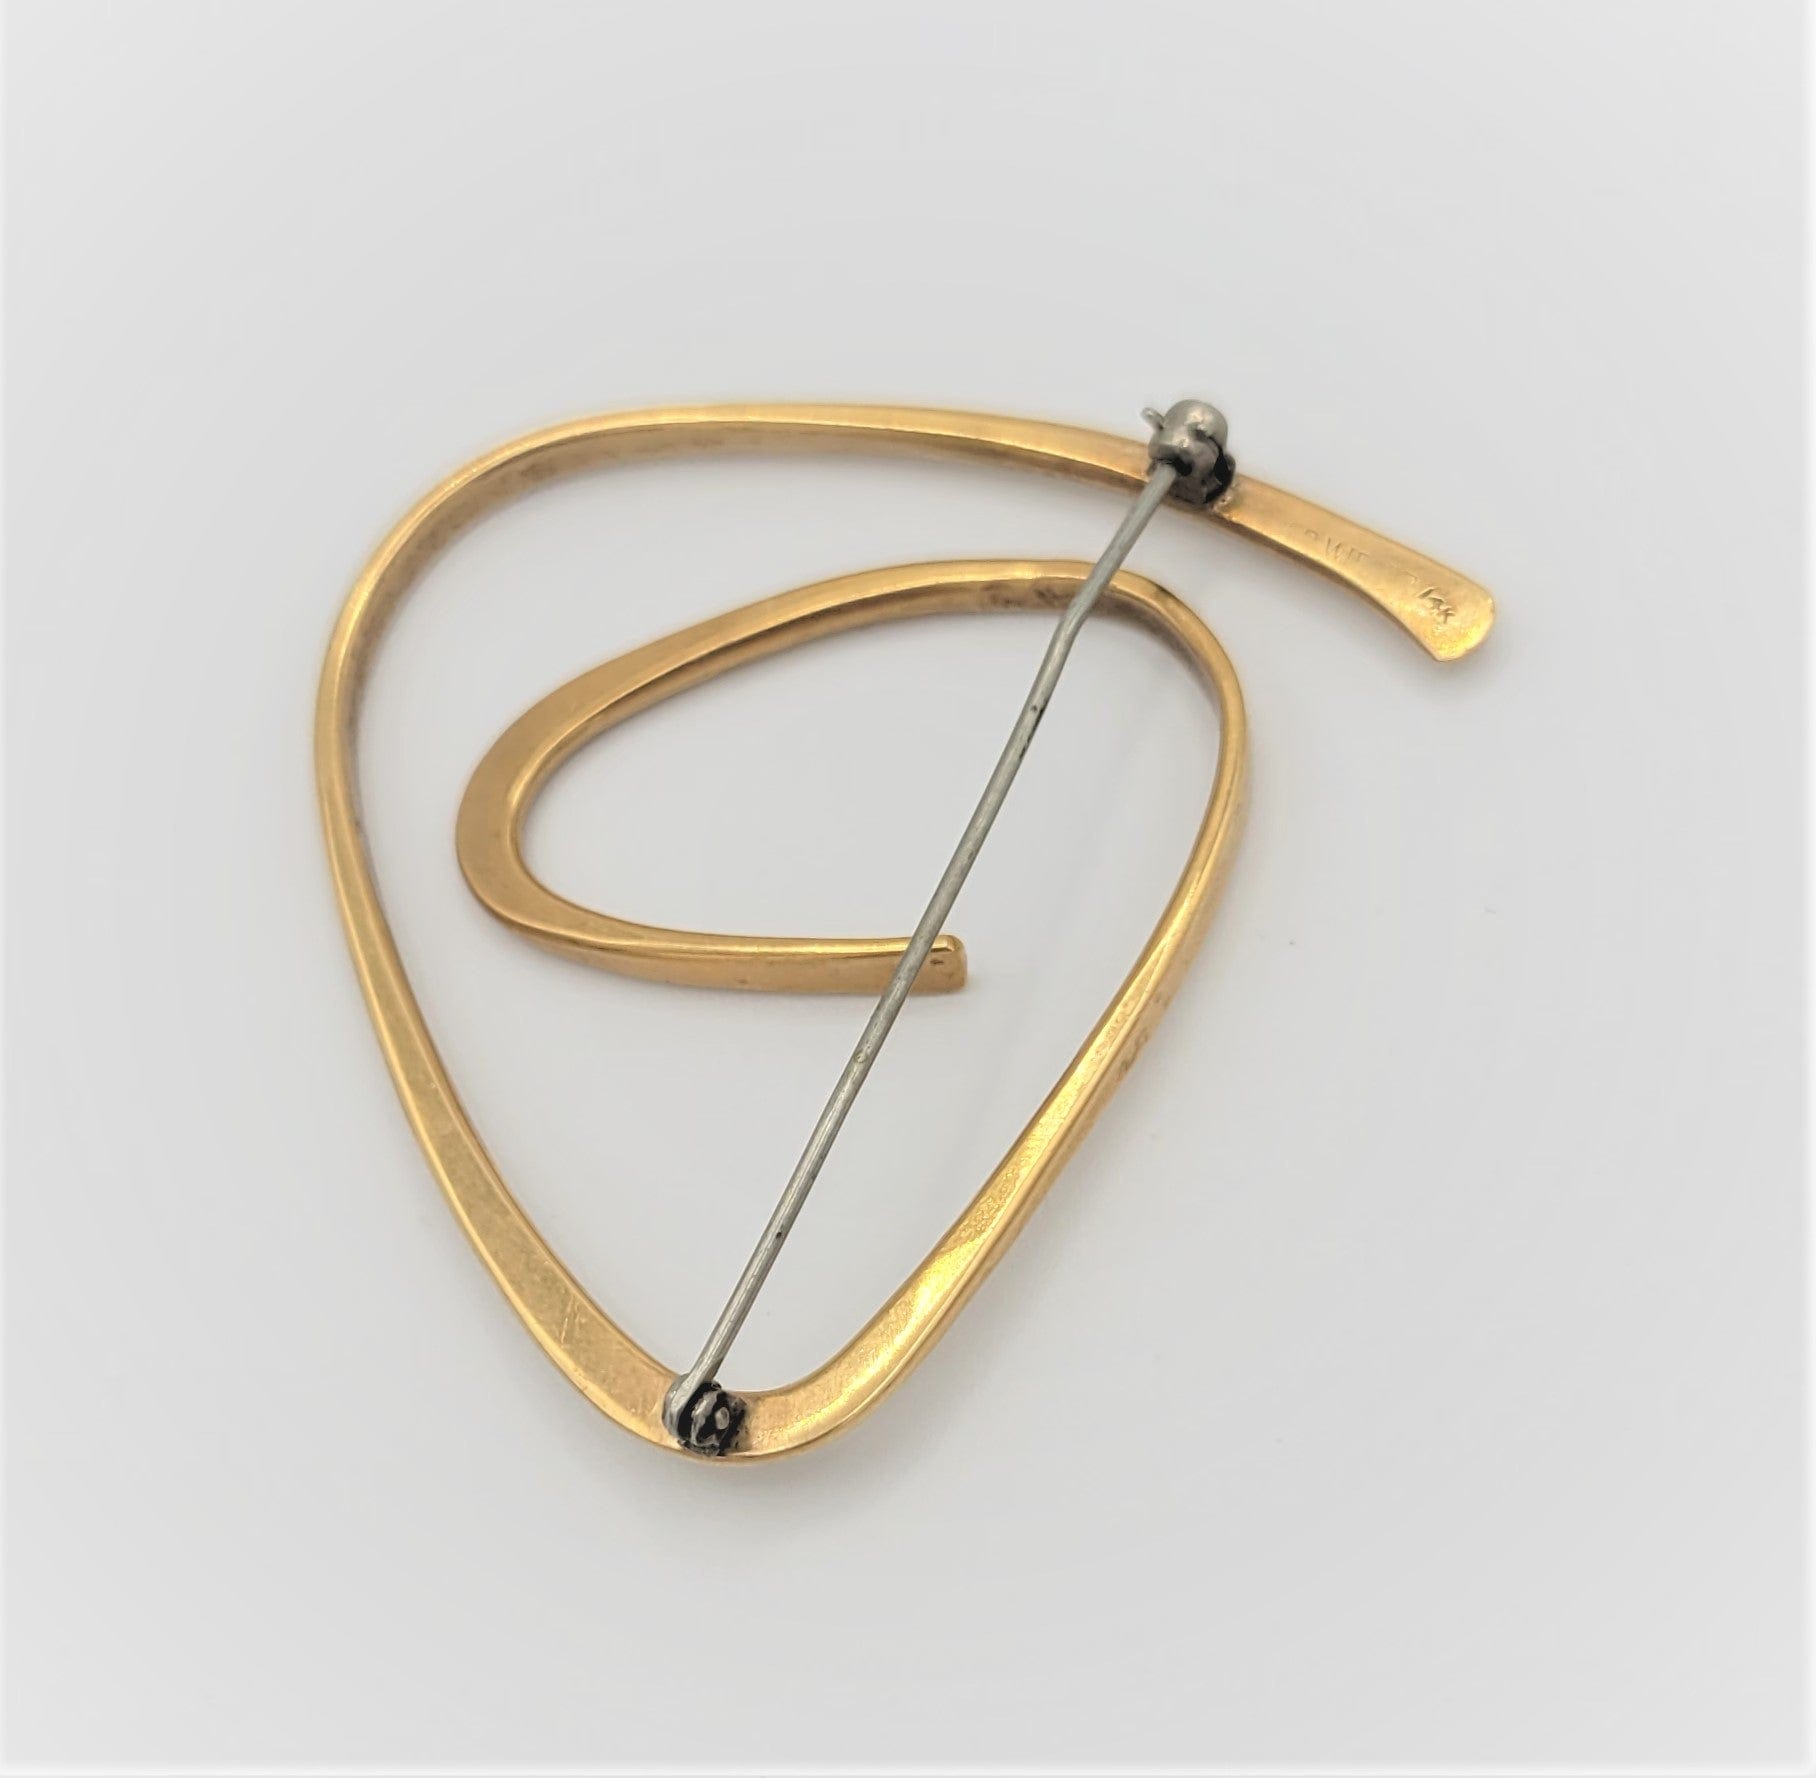 Ed Wiener Jewelry SUPERB Iconic Ed Wiener 14kt Gold LARGE Modernist Spiral Brooch Circa 1950s